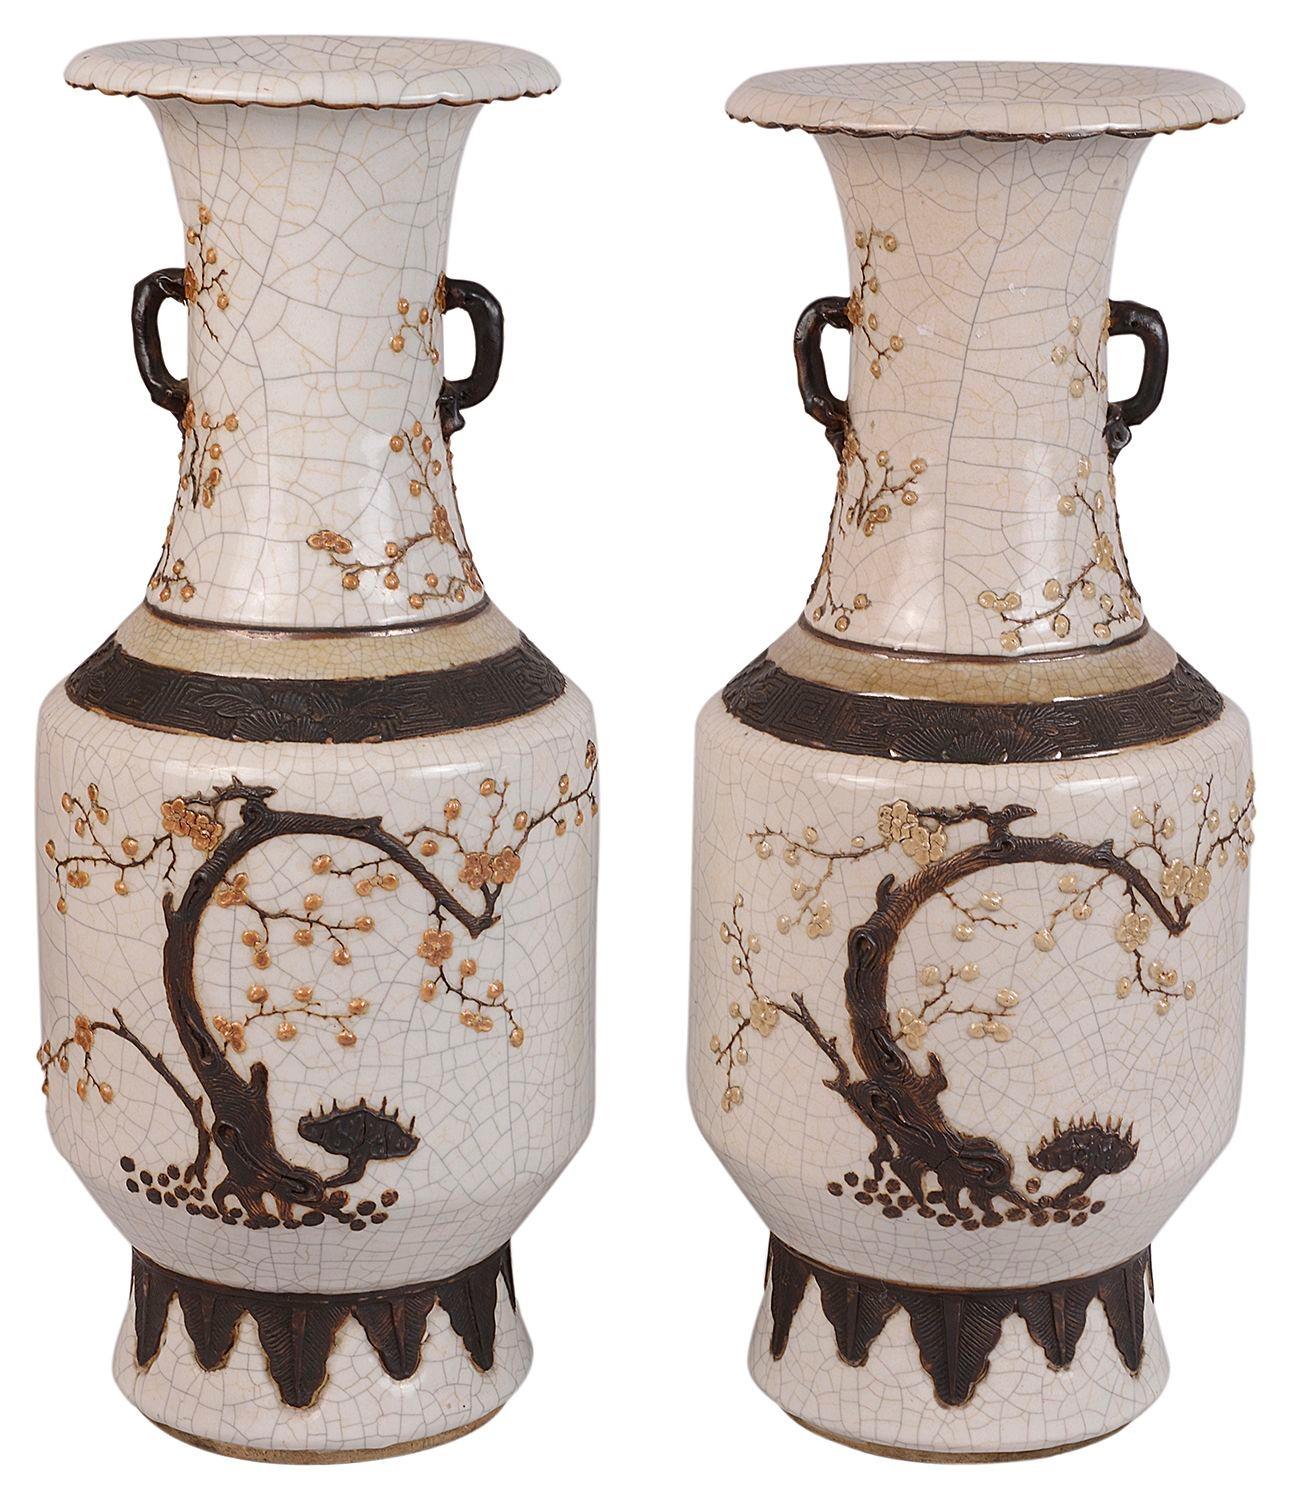 An impressive good quality pair of late 19th century Chinese crackleware vases, each with a white ground and bronzed boarder, motif and foliate decoration, circa 1890.
 
 
Batch 72 61191 DUZKN.